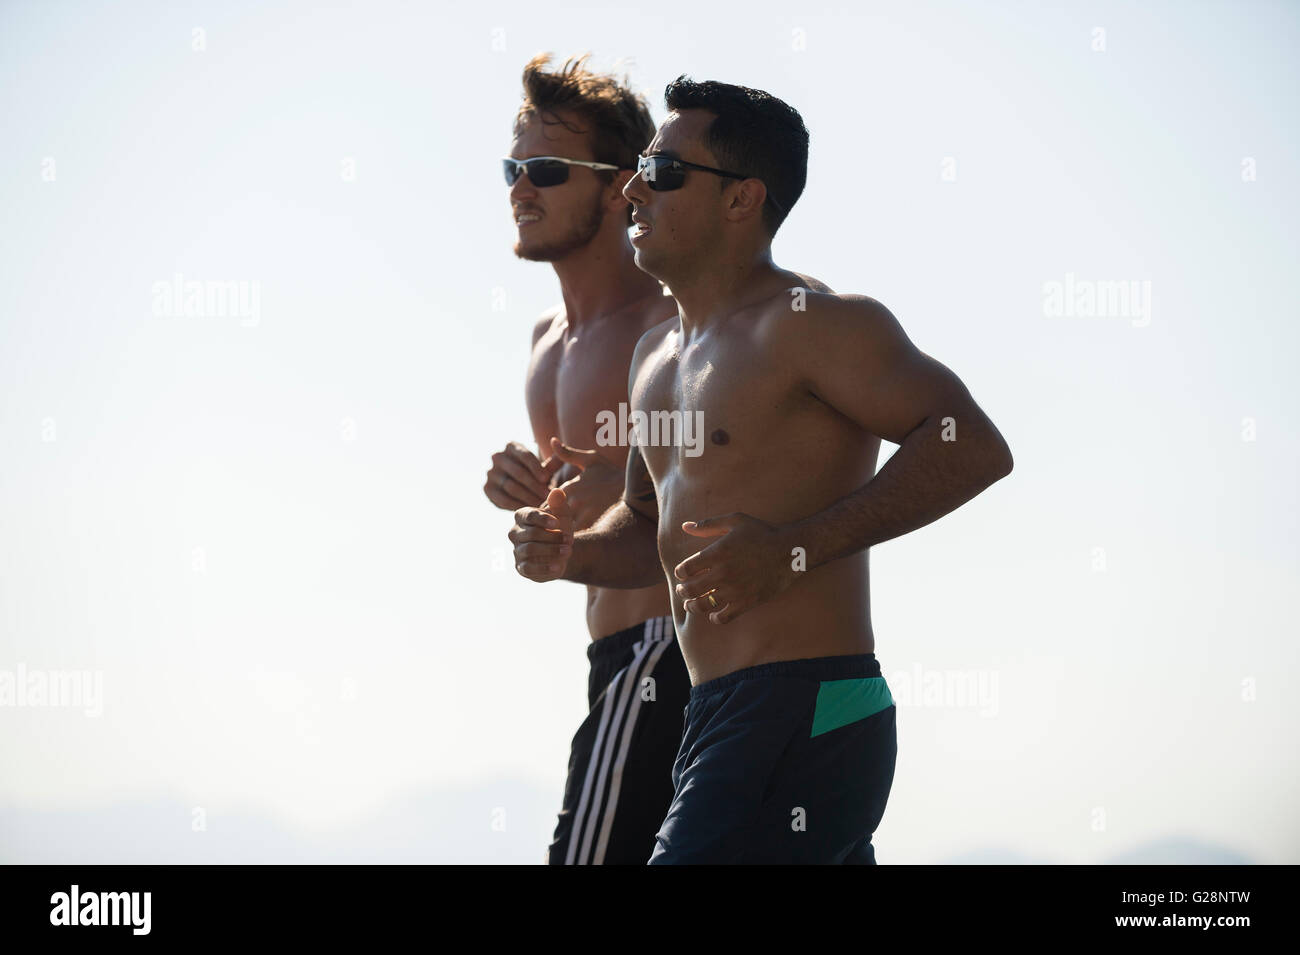 RIO DE JANEIRO - APRIL 3, 2016: Pair of shirtless young carioca Brazilian men jog together in a city known for fitness fanatics. Stock Photo